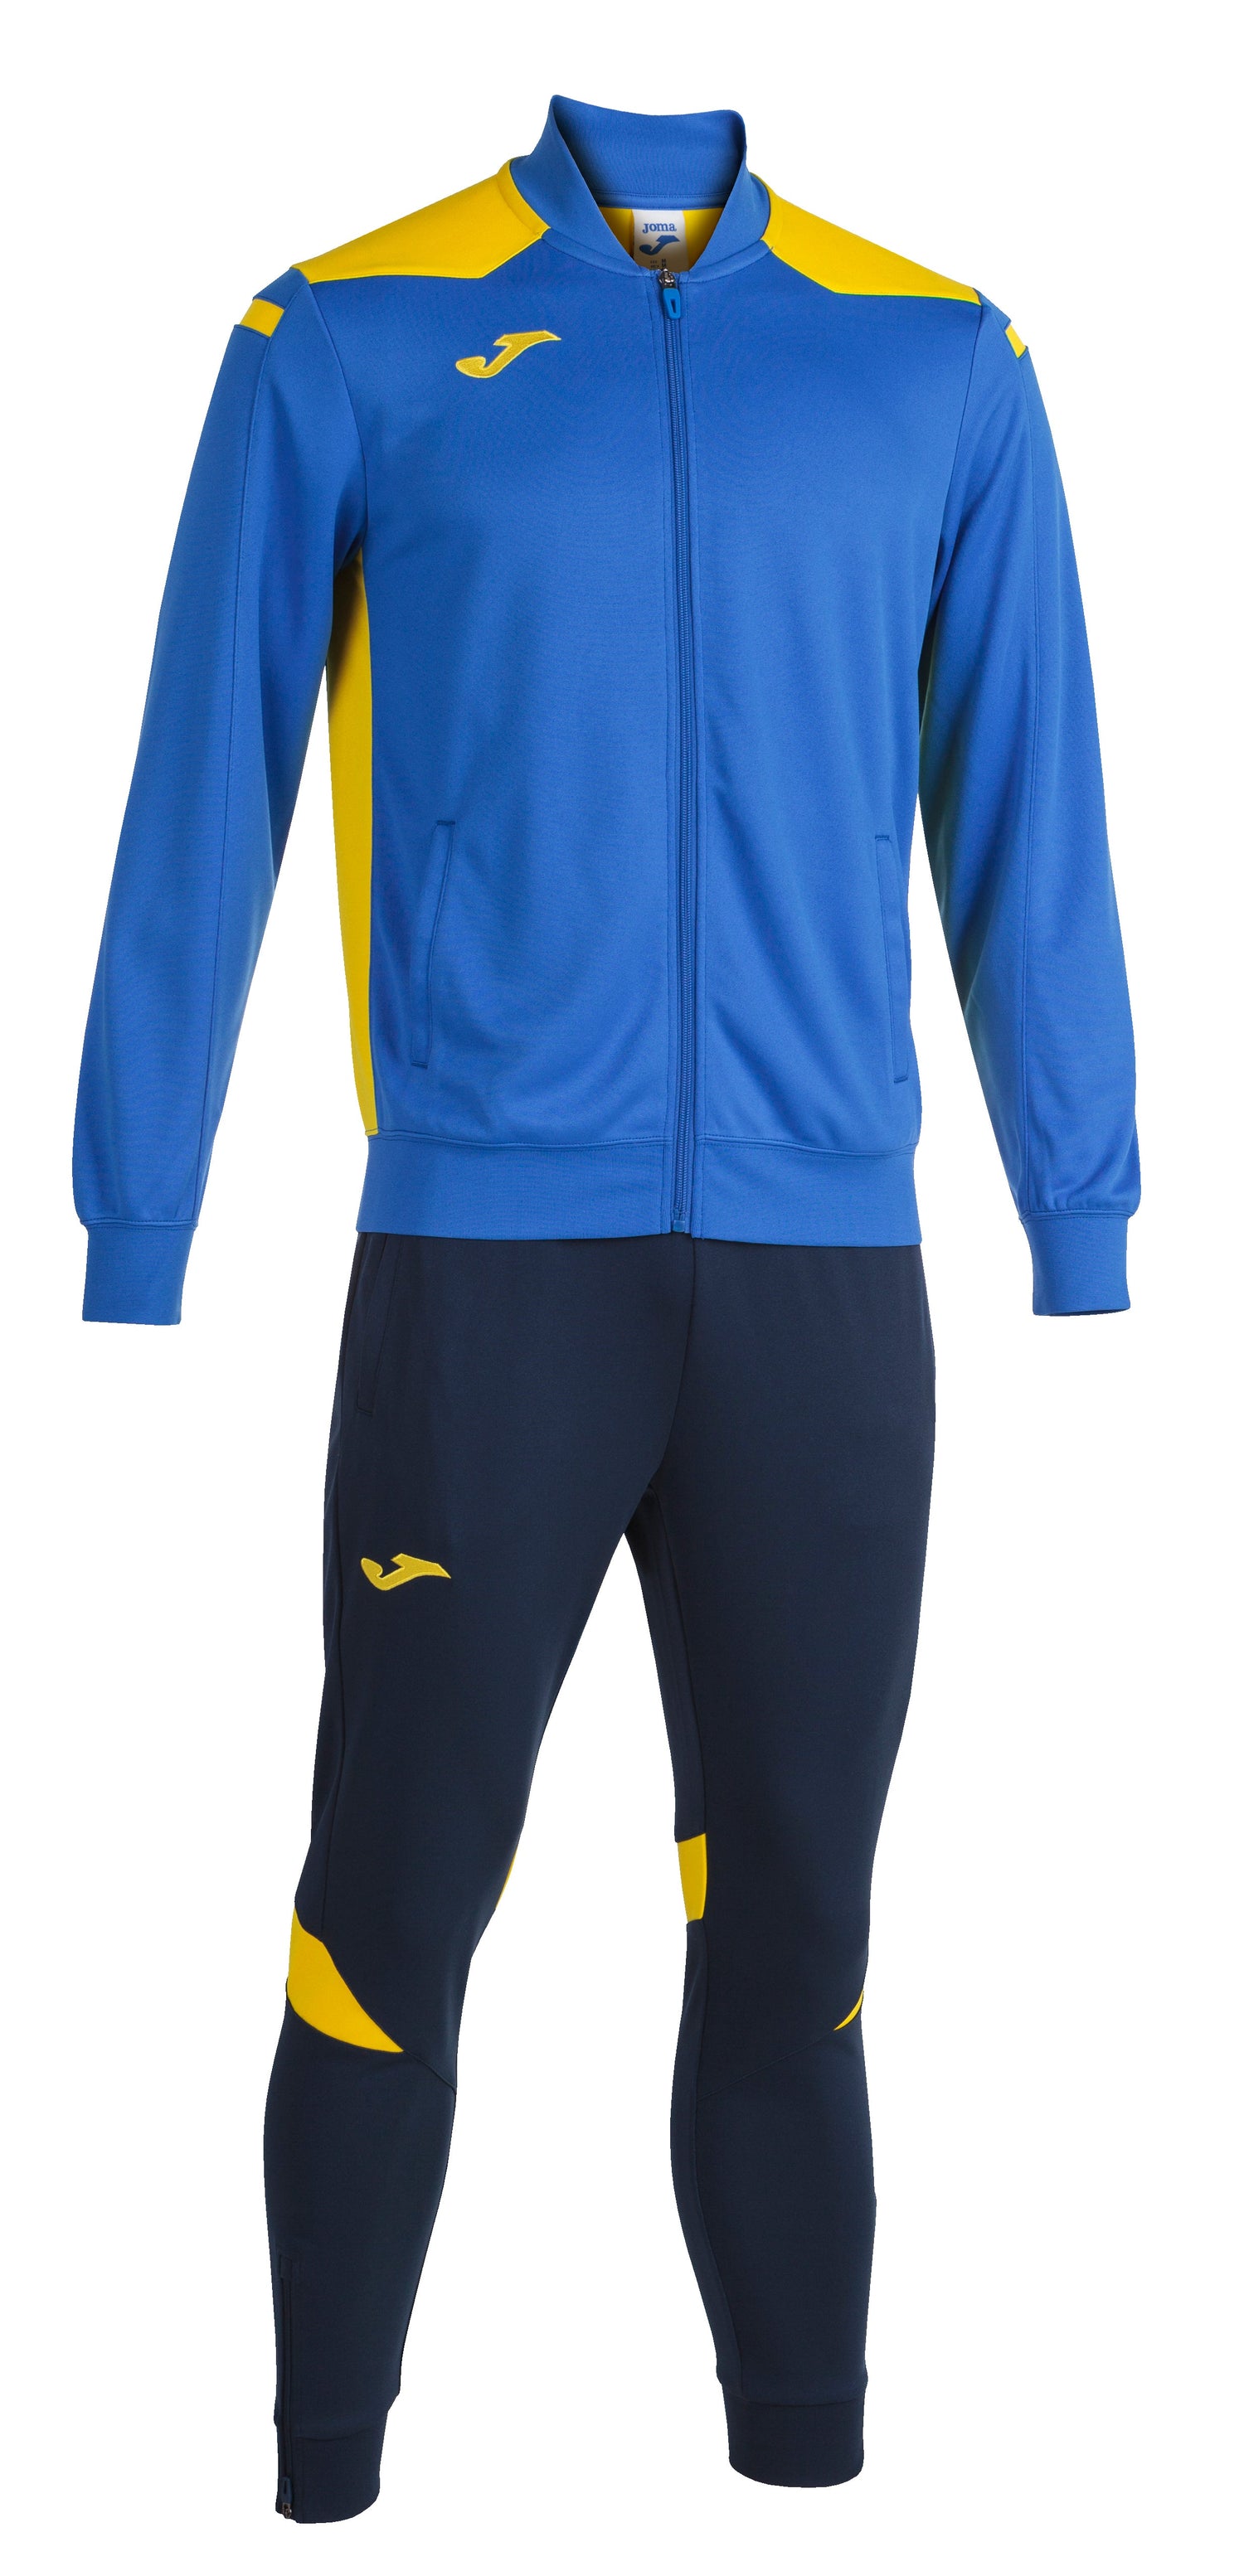 (sizes : S,M,L)Joma Sport Tracksuit available in Joma Canada Store. Customize your teamwear with sponsors and numbers. Joma is shipping in Canada.